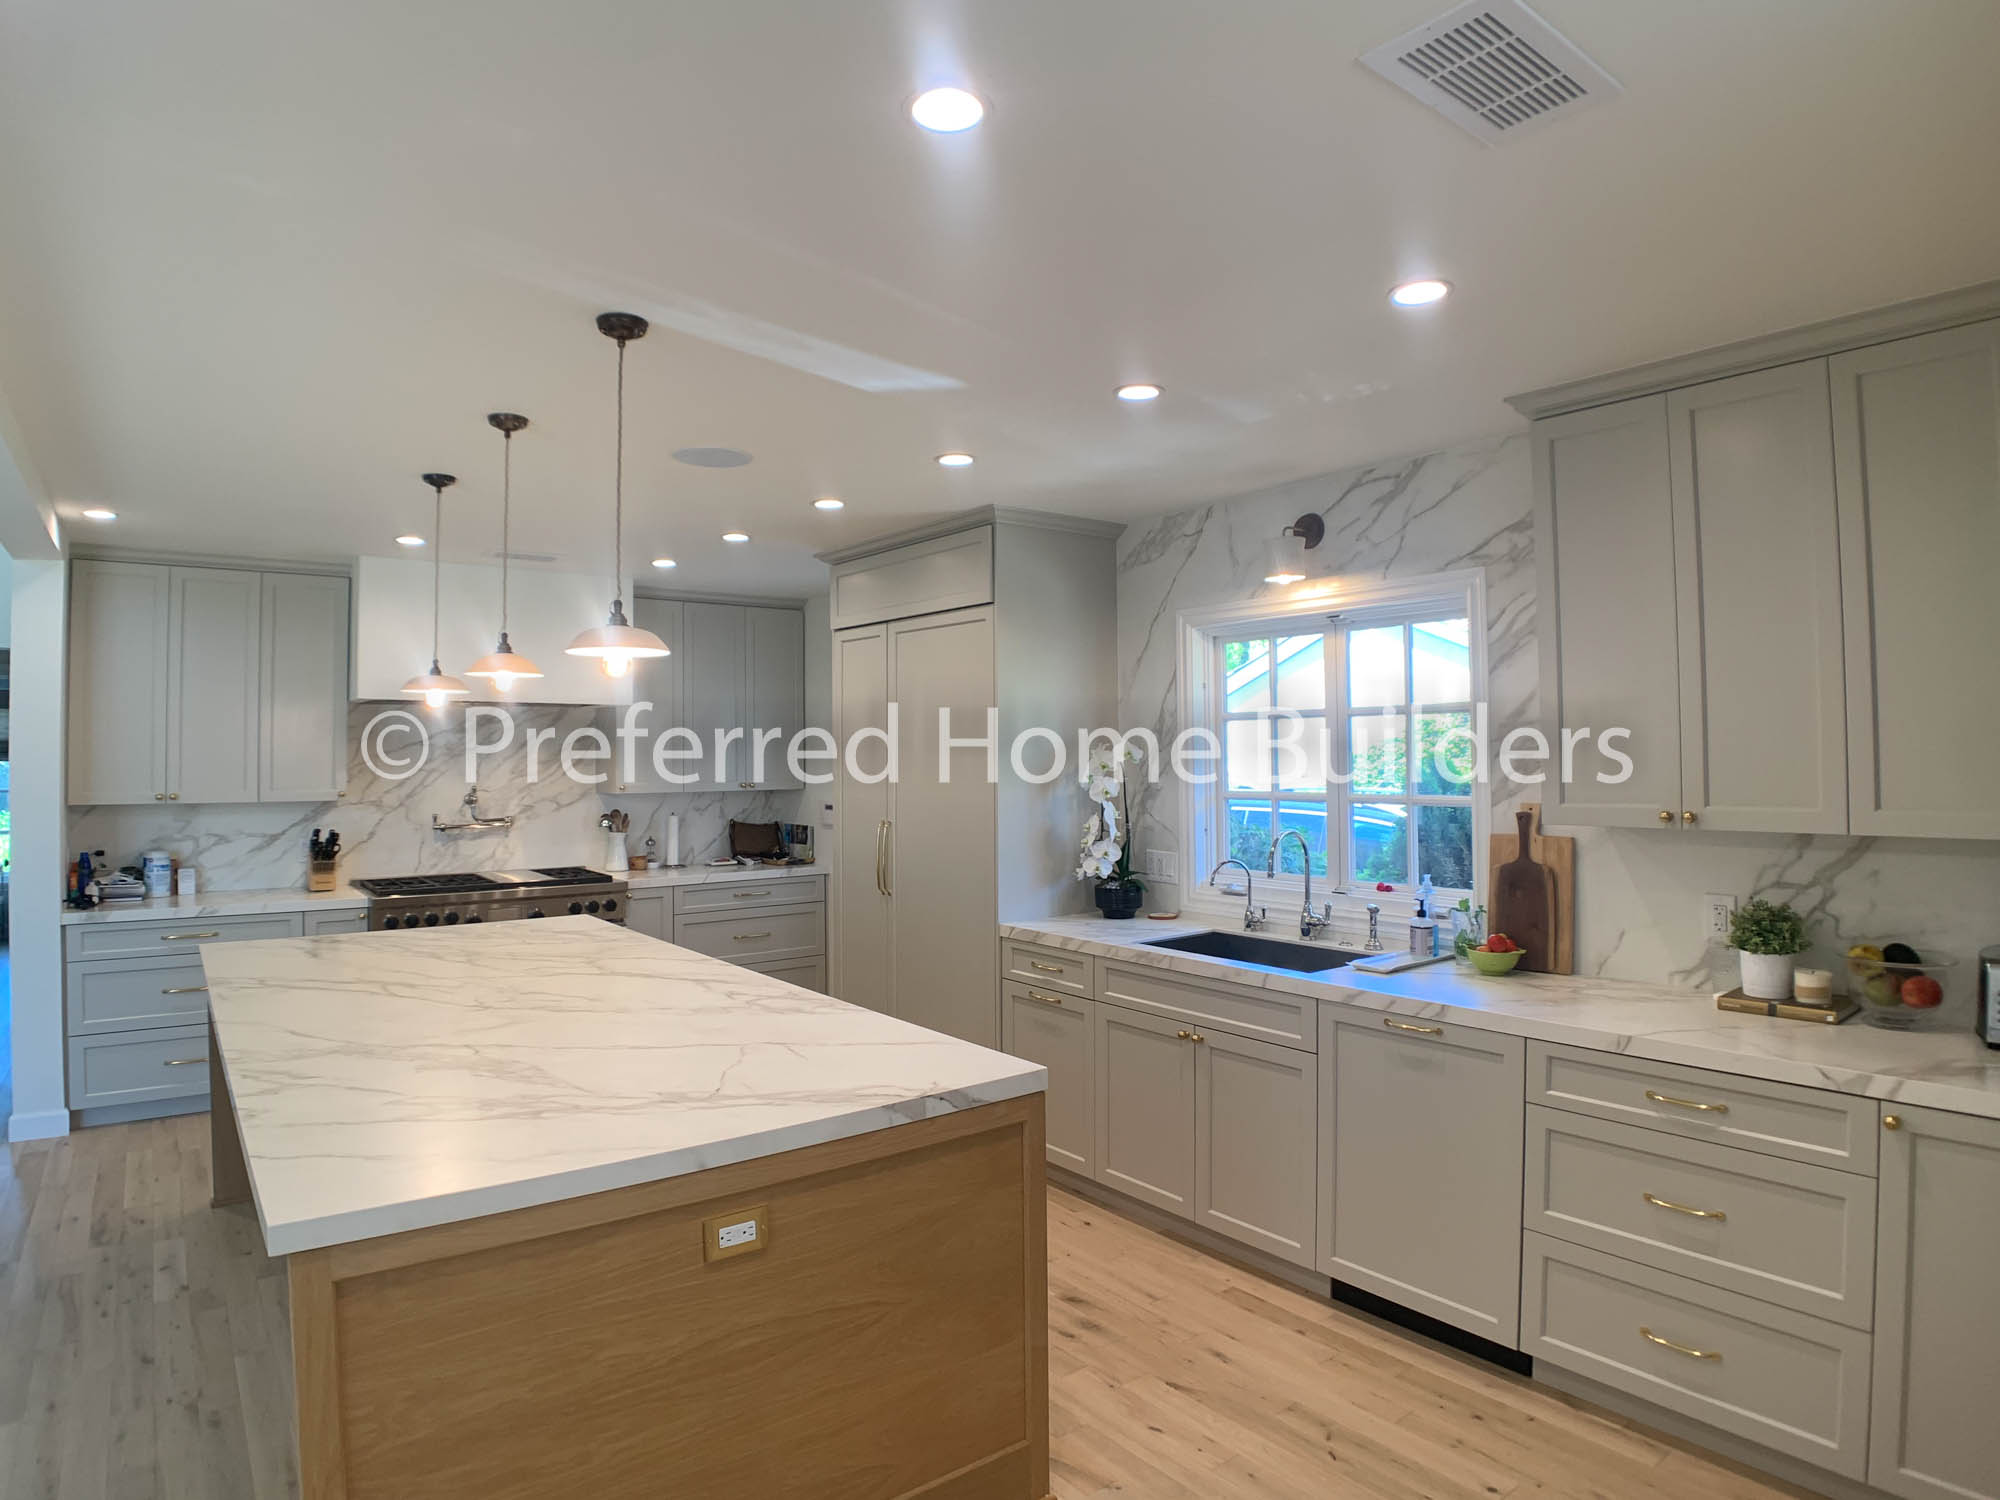 General Remodel in Brentwood Heights 14